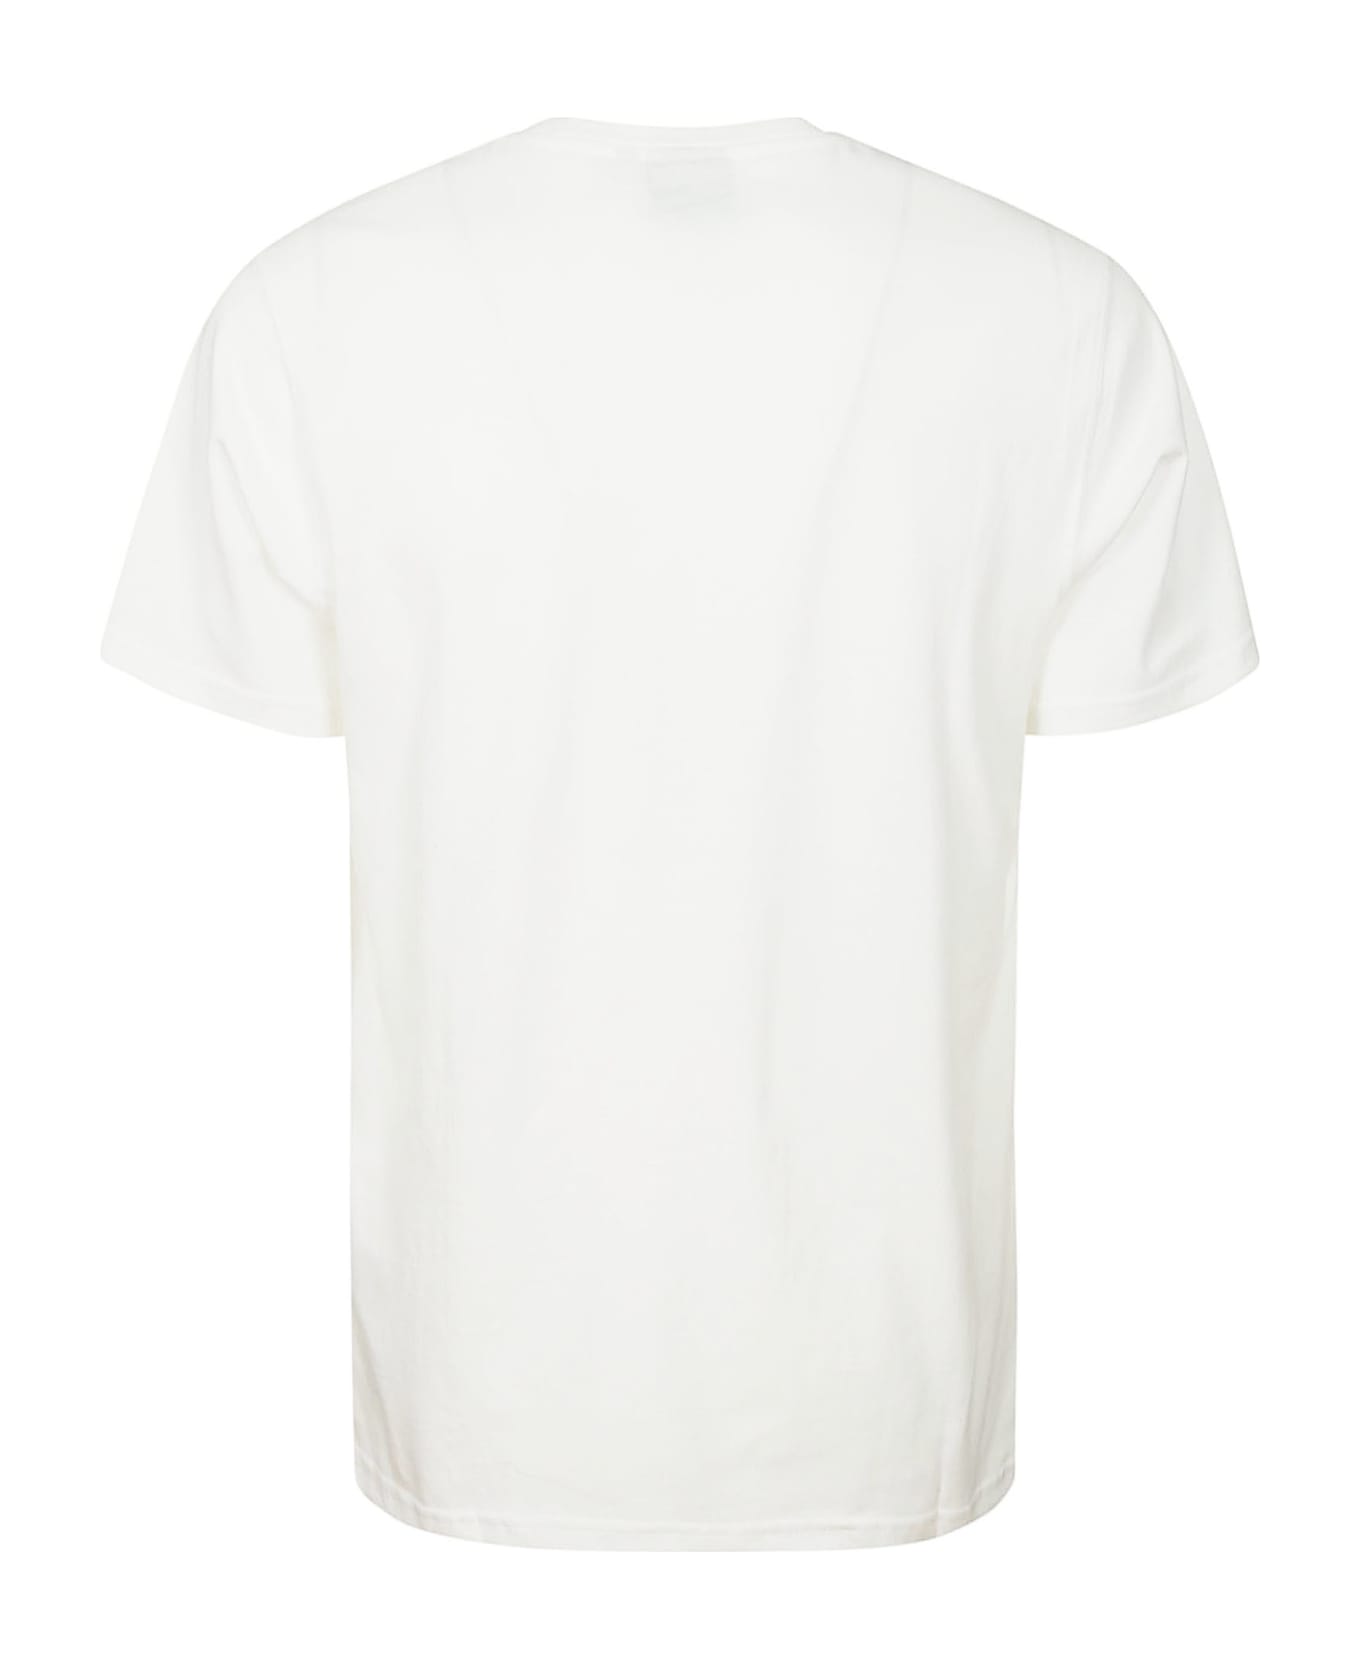 Barbour Essential Large Logo Tee - White シャツ